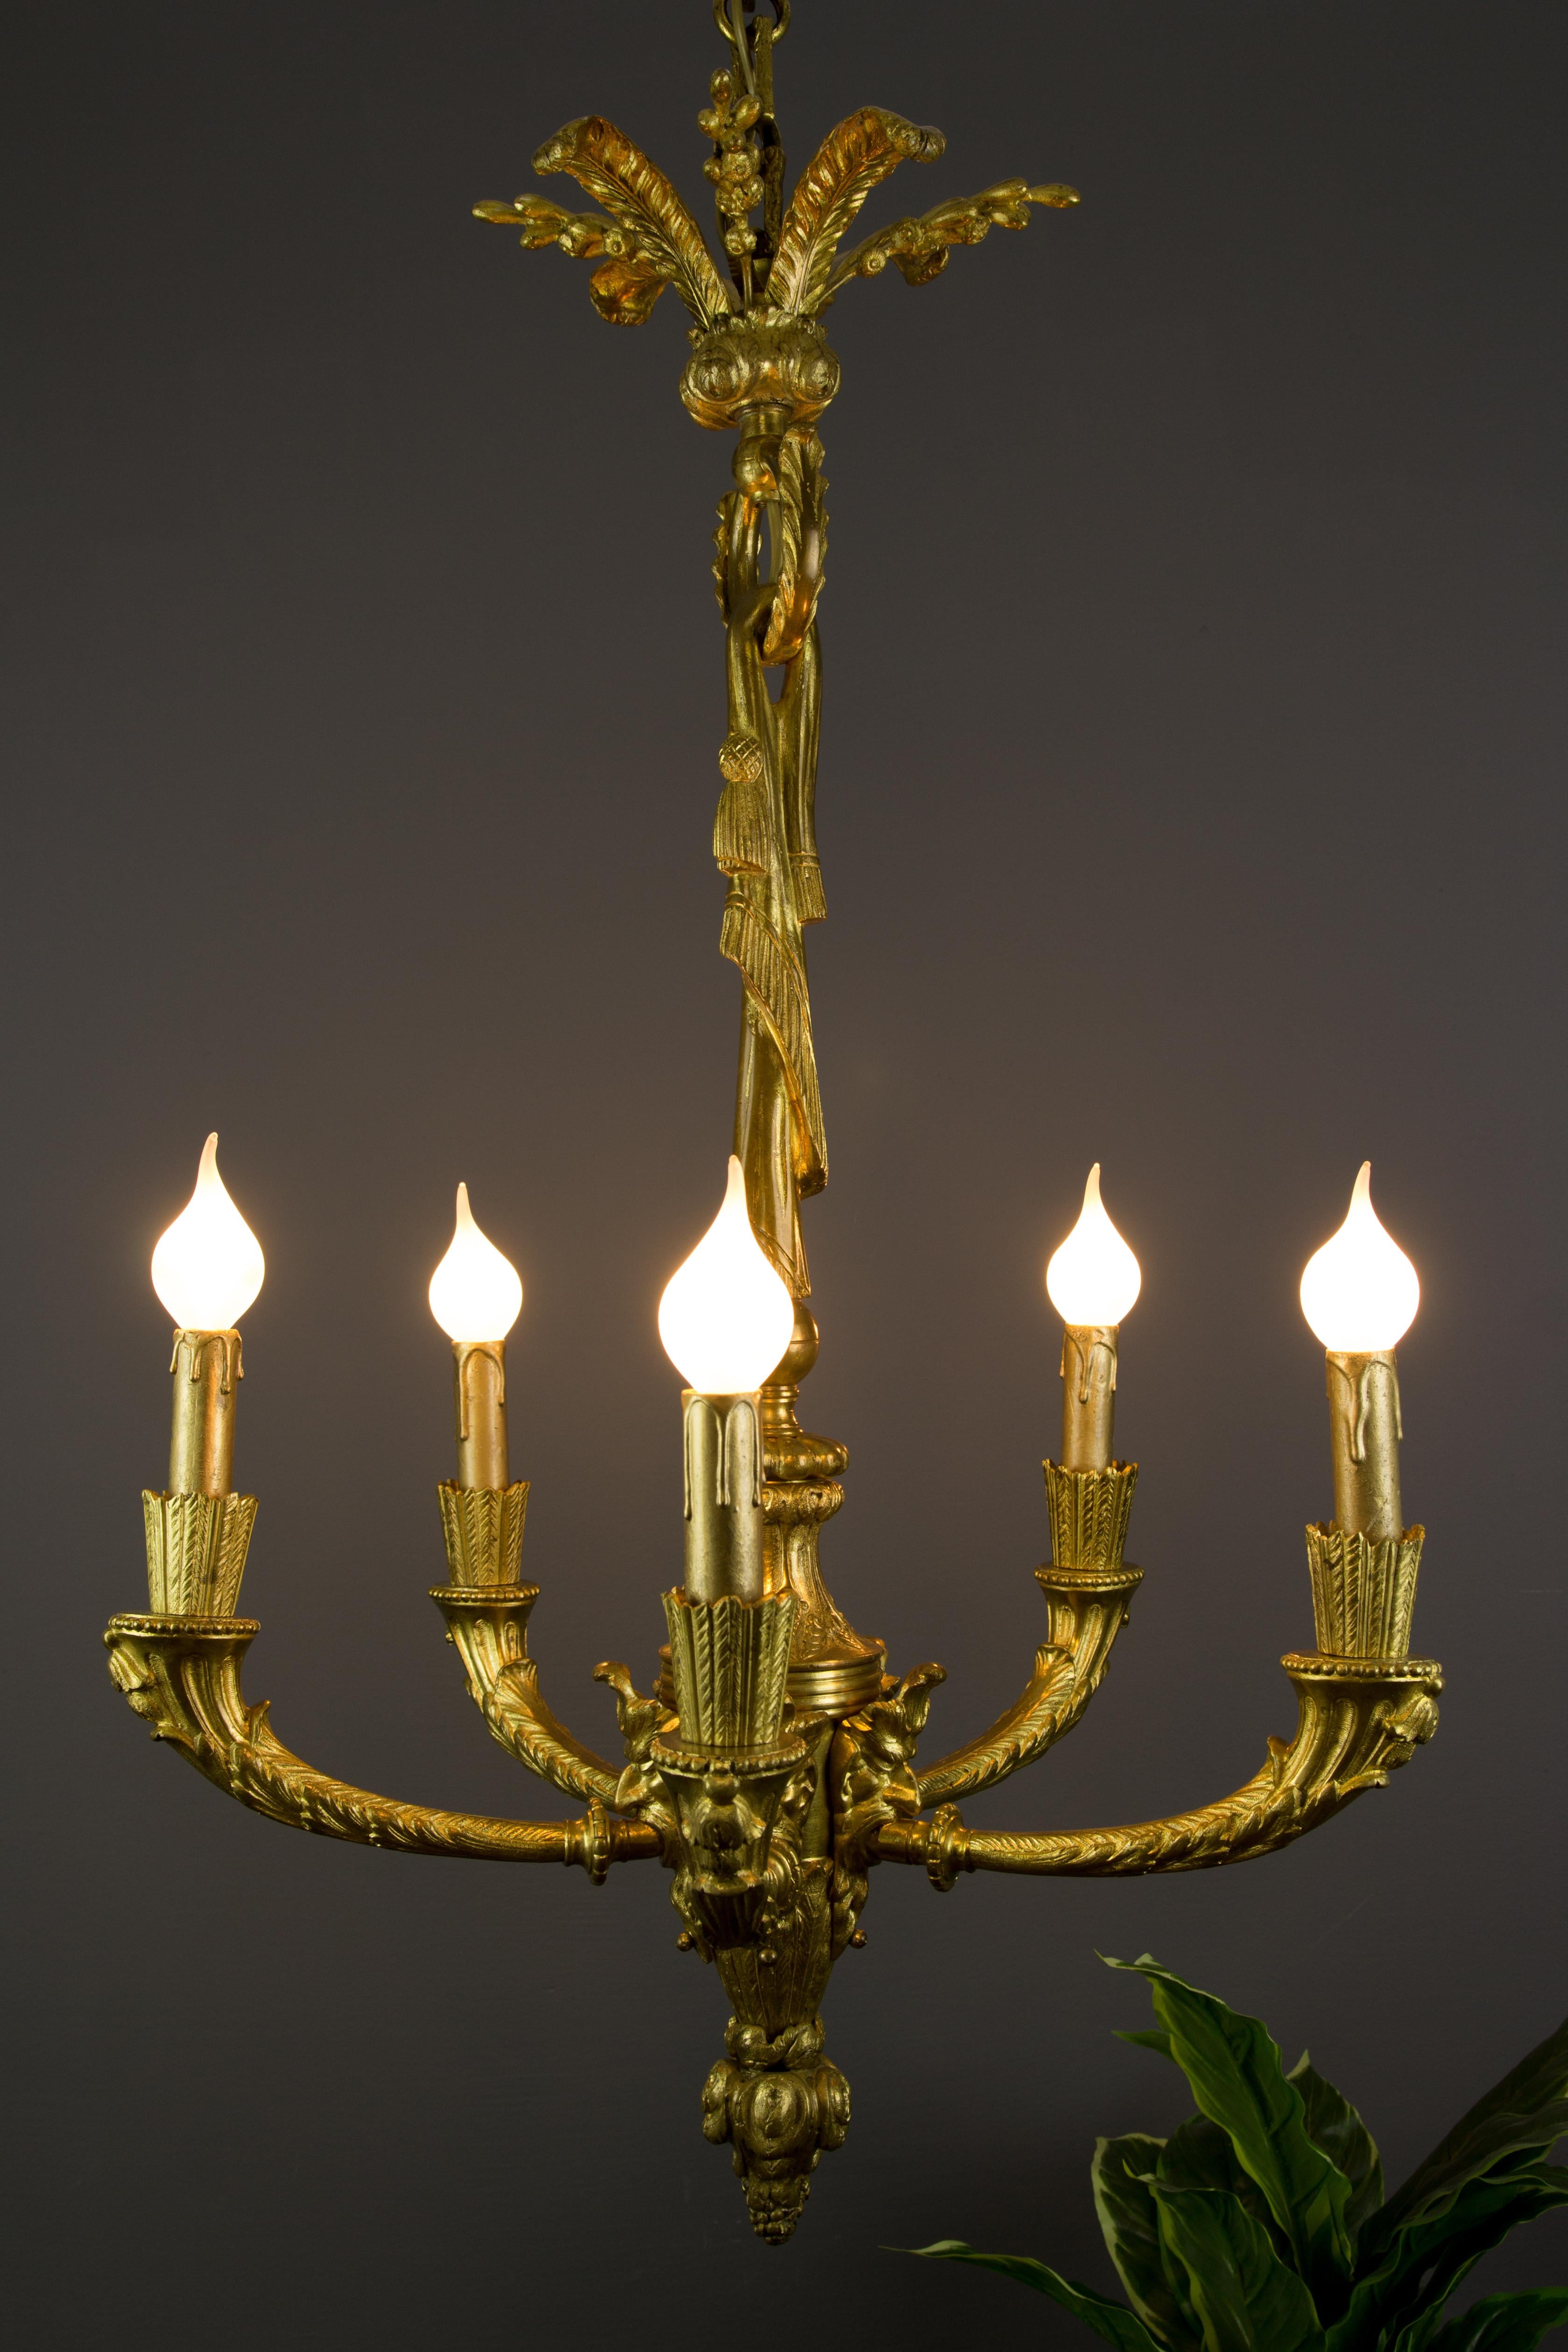 Elegant French Louis XVI style gilt bronze five-light electrified chandelier from the late 19th century. Each arm is held by a head of Bacchus and decorated with foliate motifs. The central support is draped with a bronze fringe fabric, on top